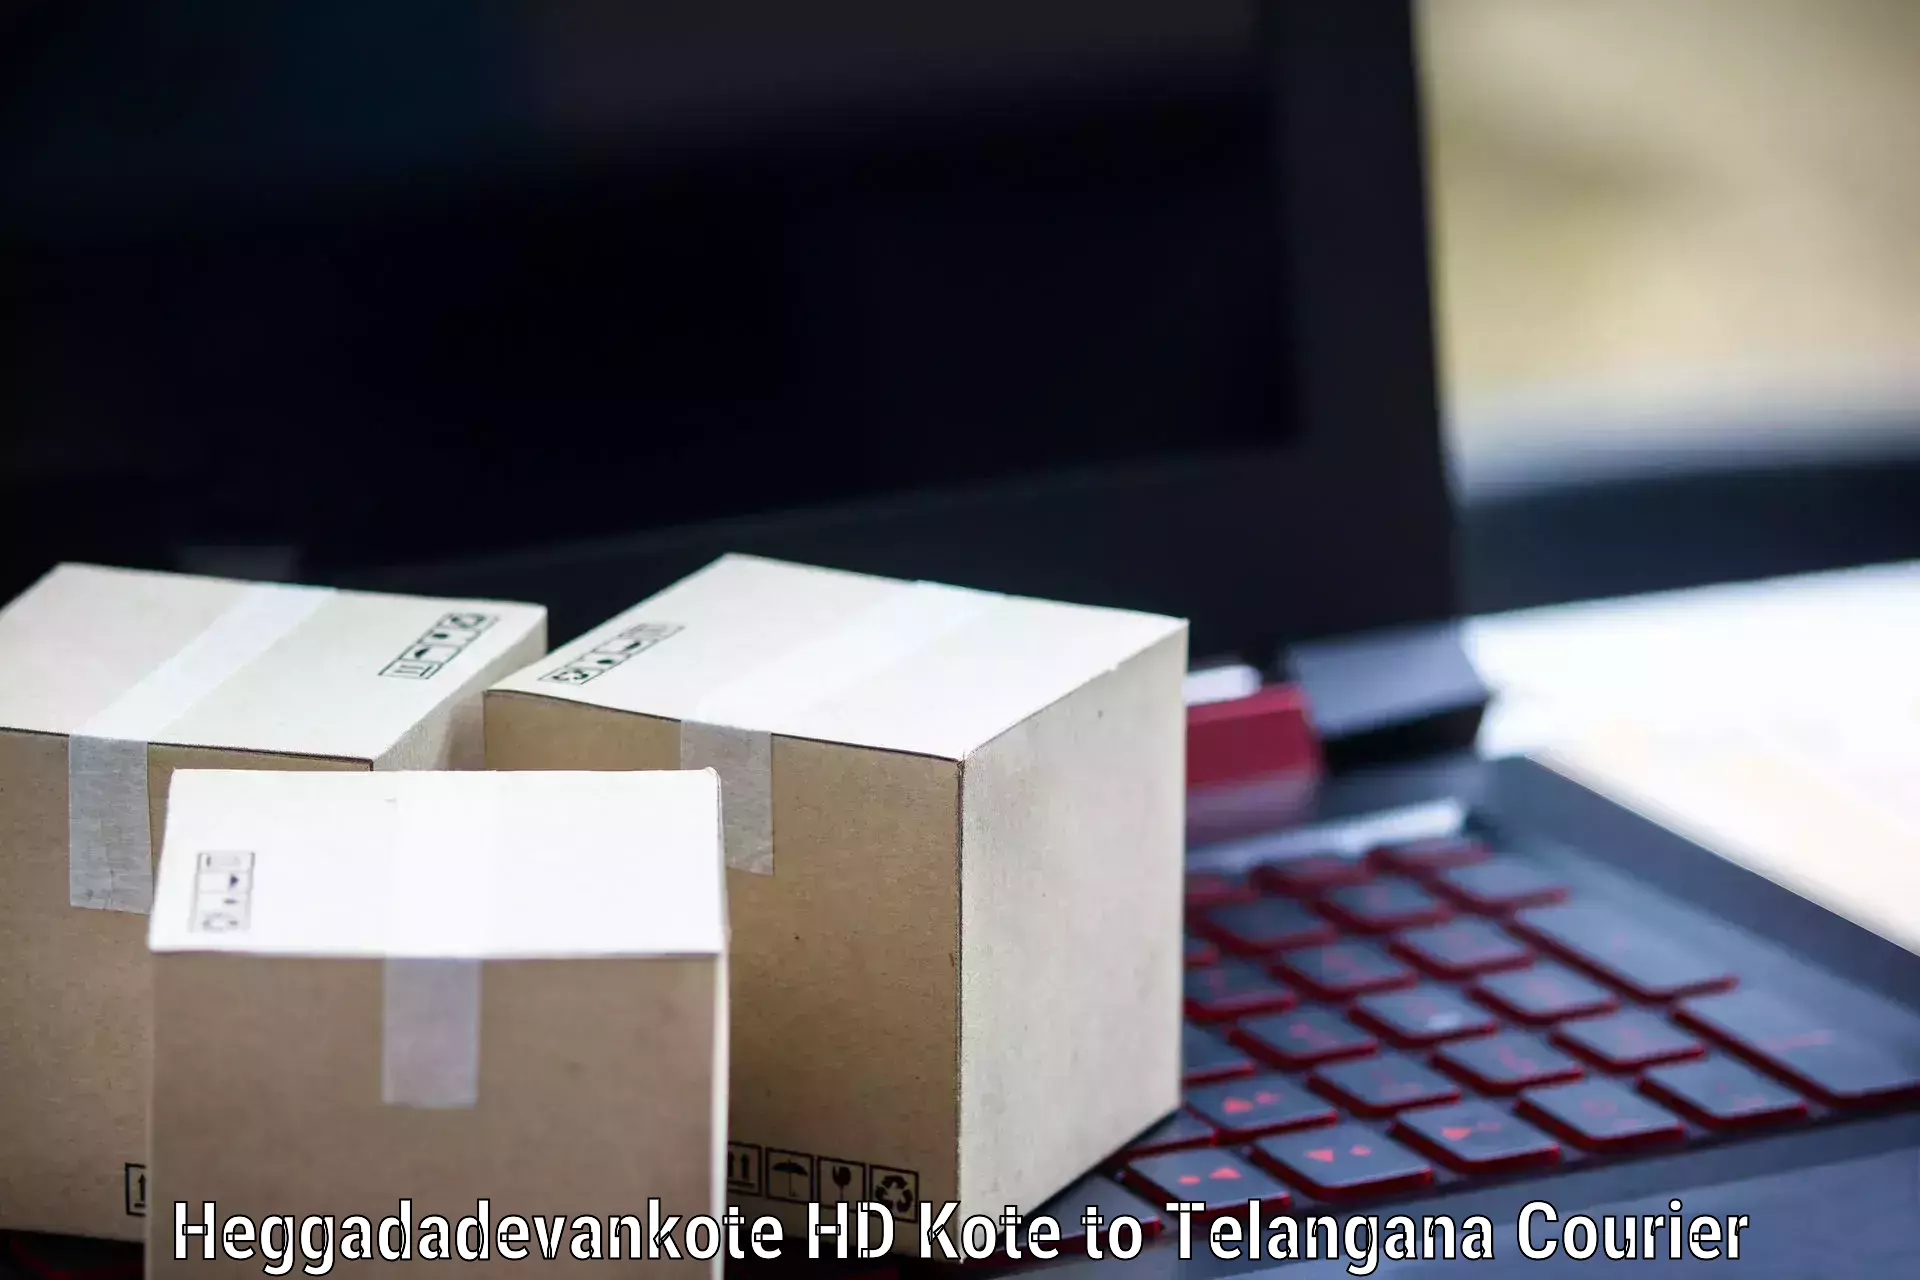 Multi-national courier services in Heggadadevankote HD Kote to Pathipaka